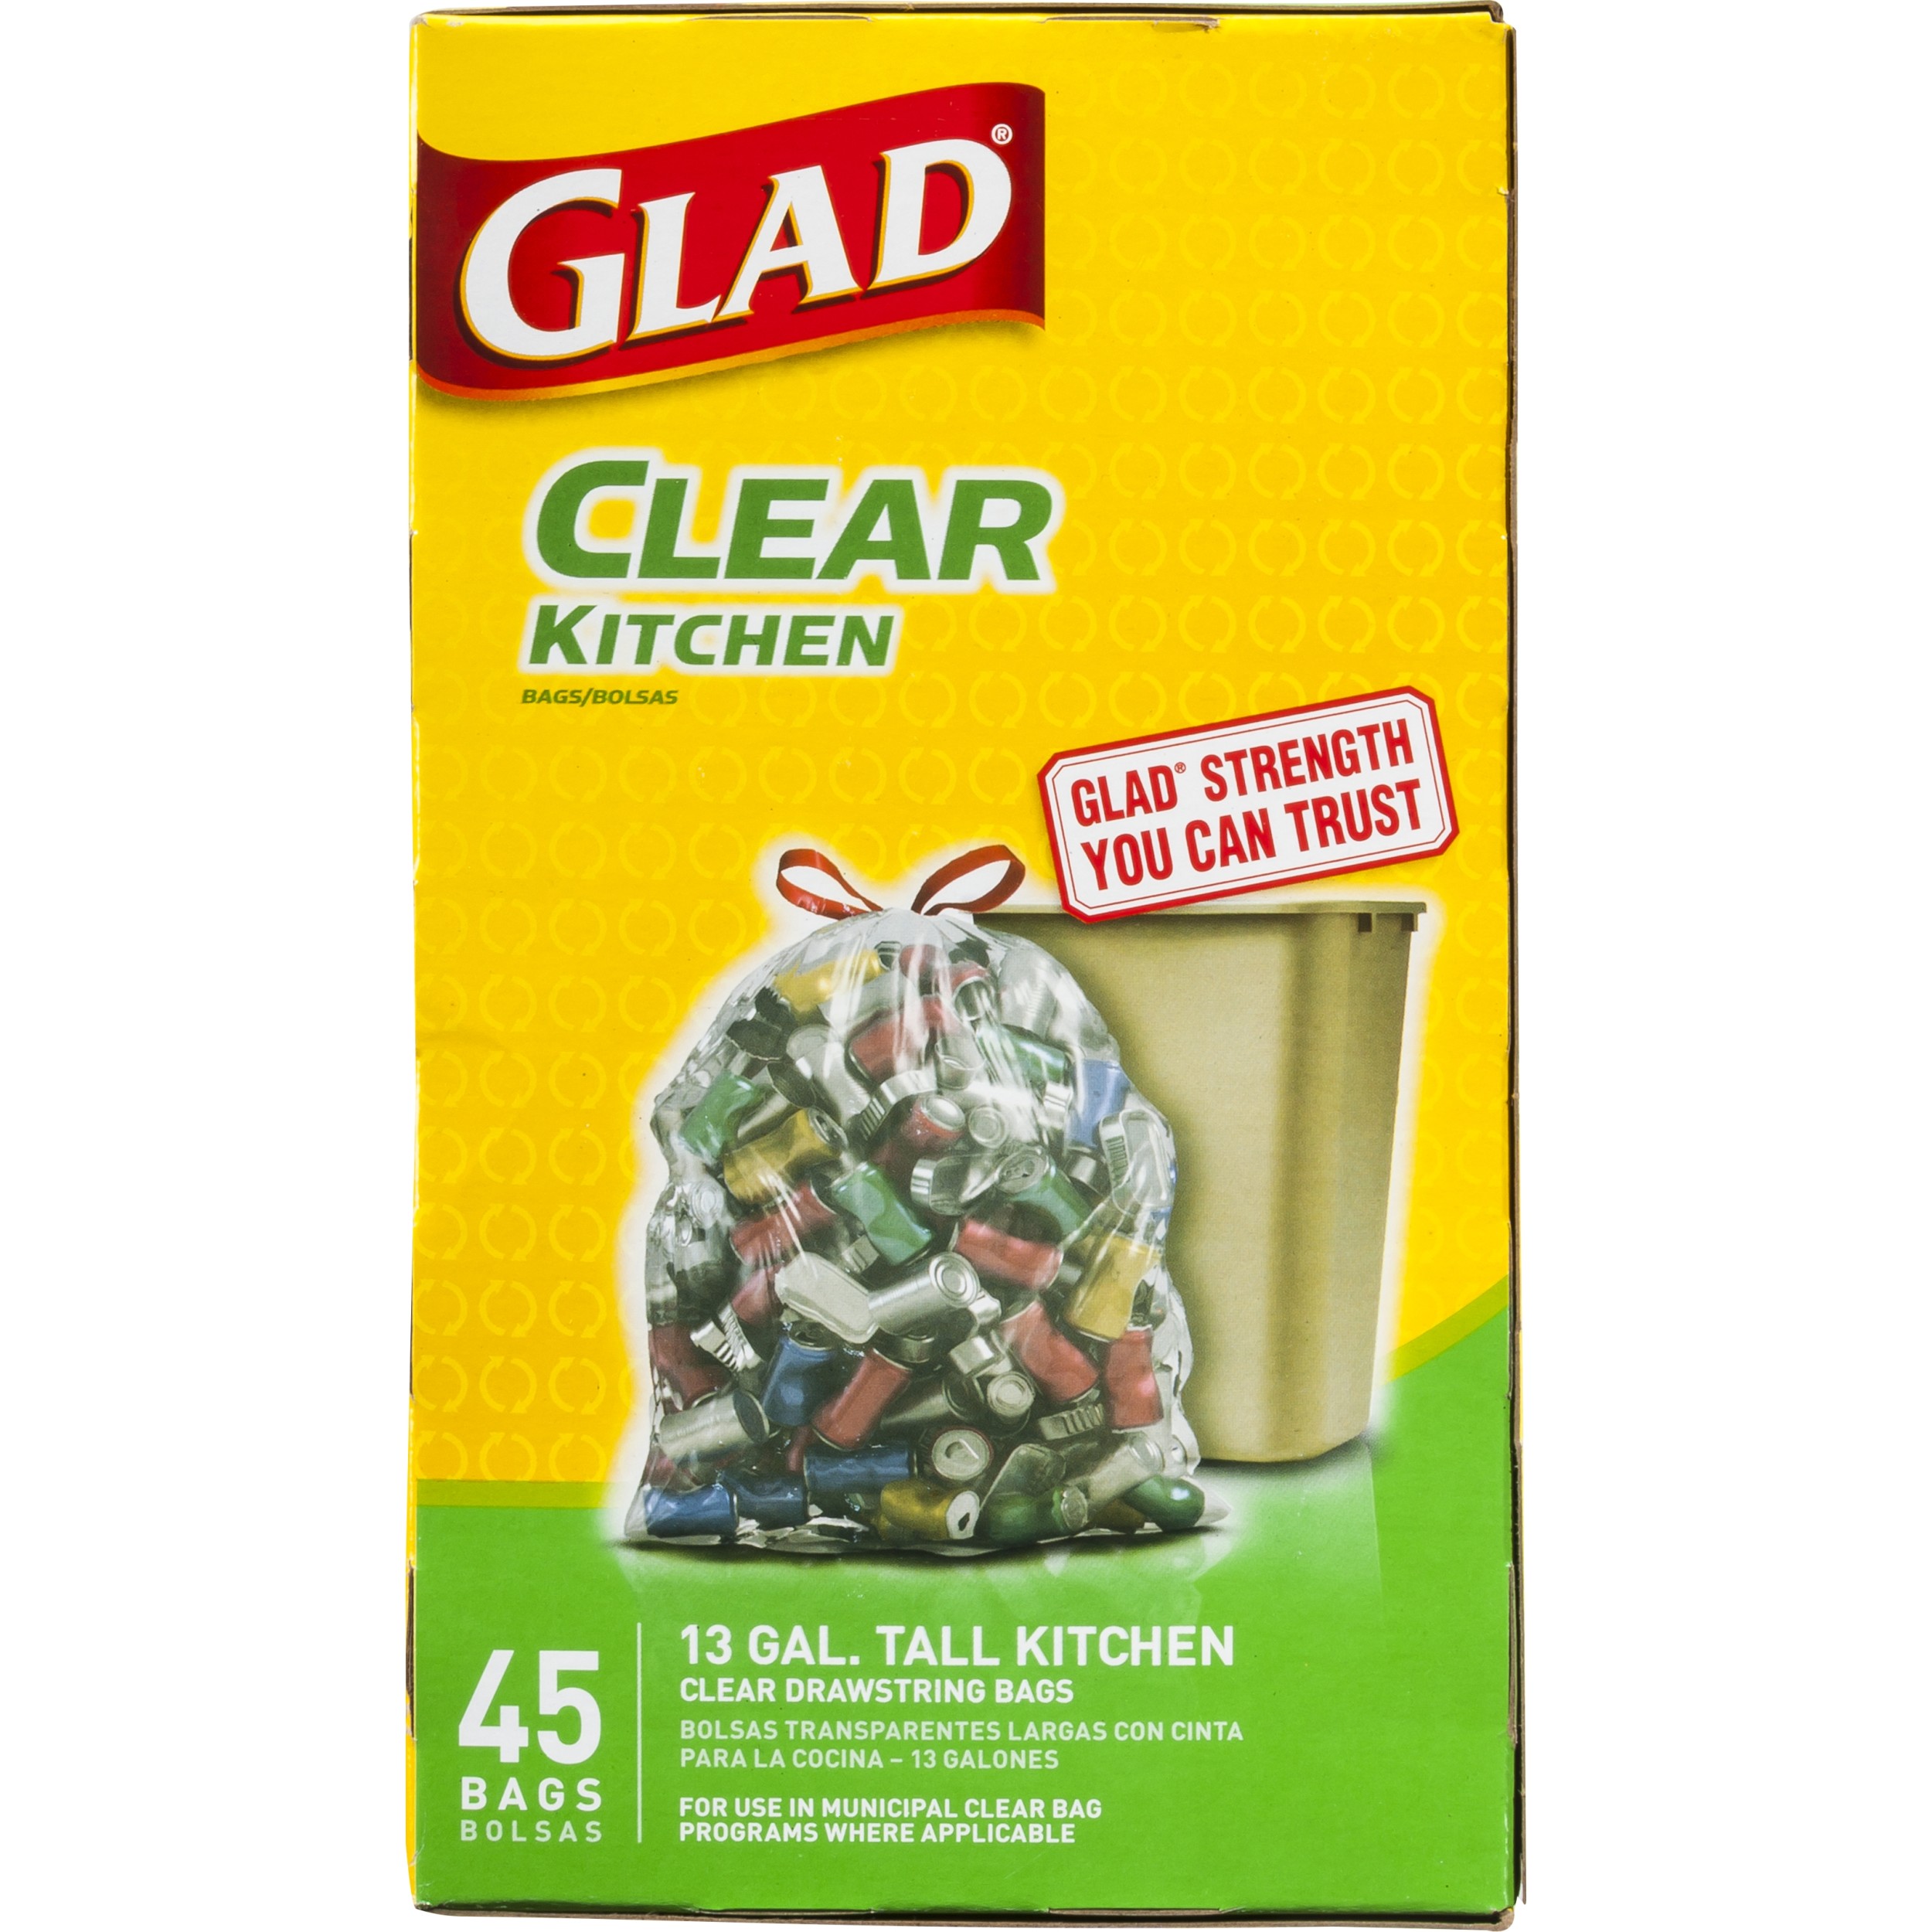 Glad Tall Kitchen Trash Bags, 13 Gallon, 45 Bags (Clear Recycling) - image 1 of 3